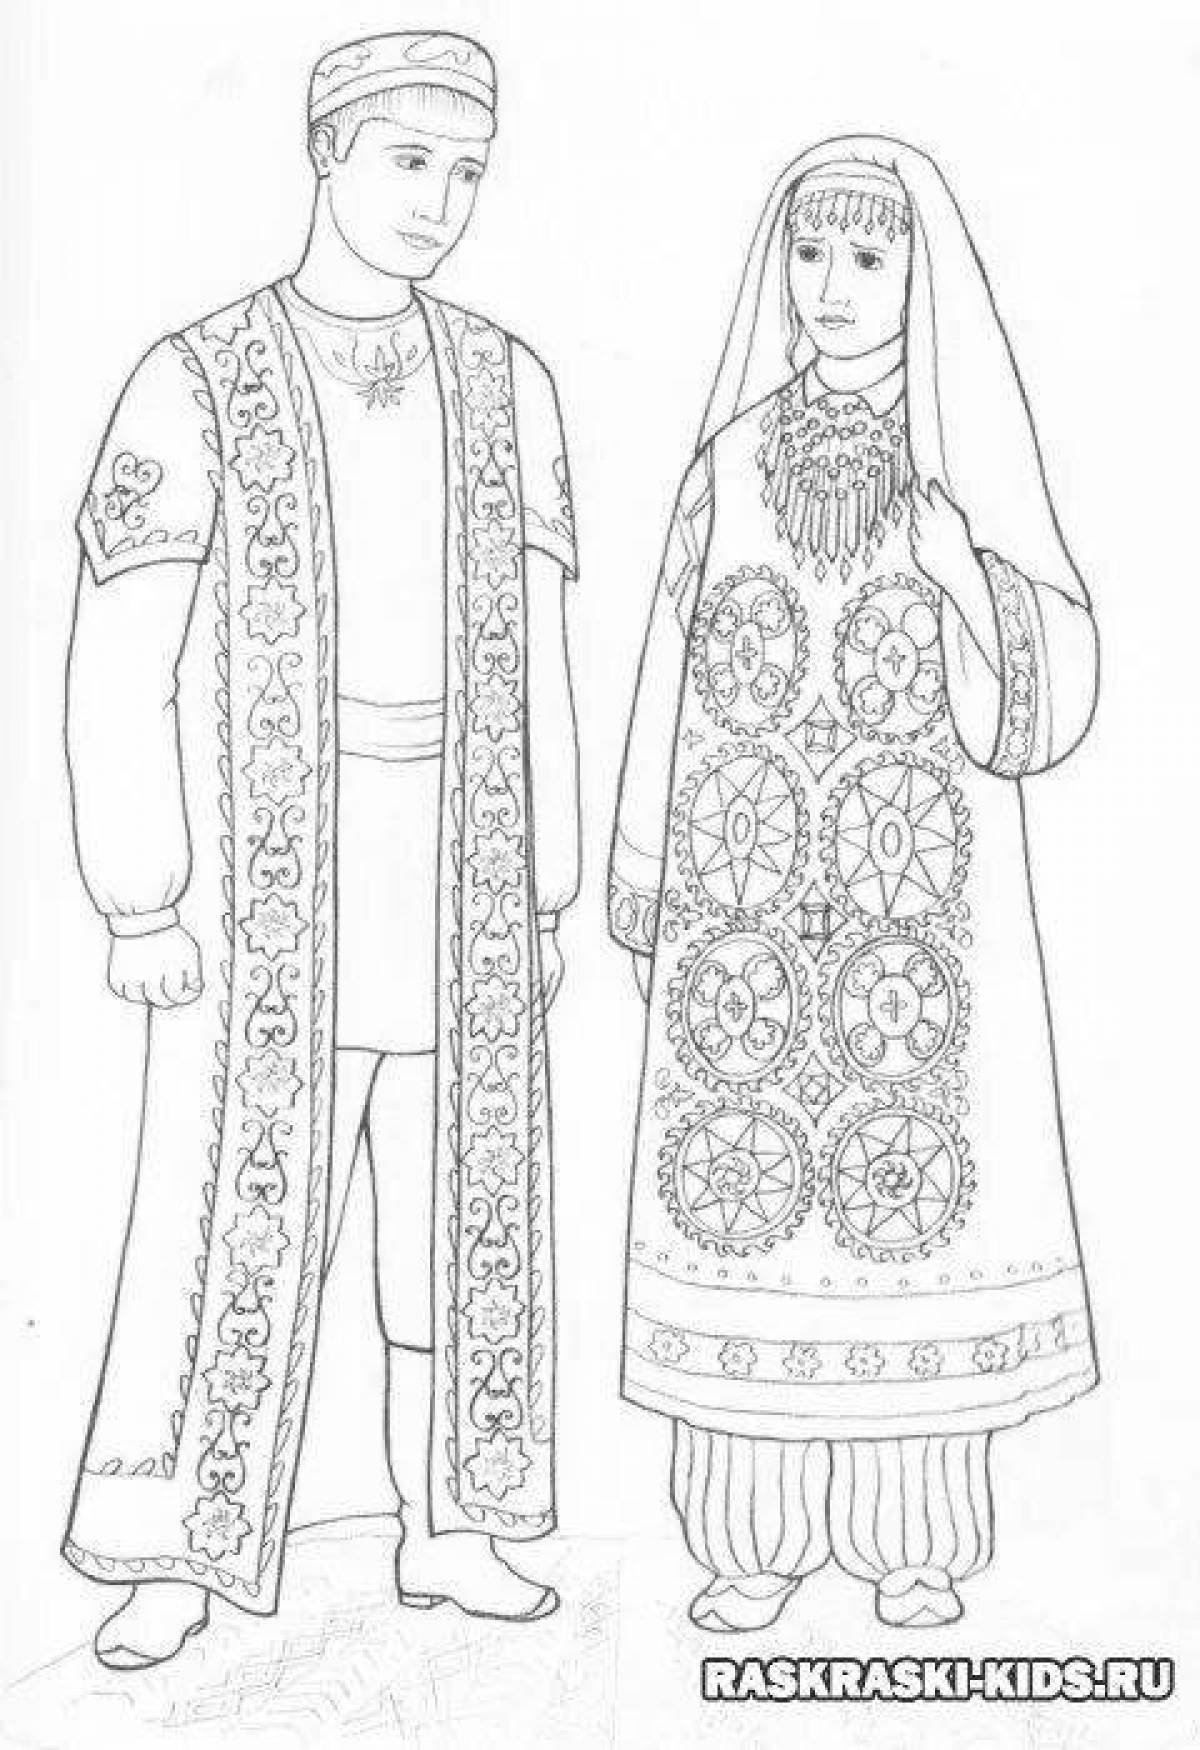 Coloring page playful tatar costume